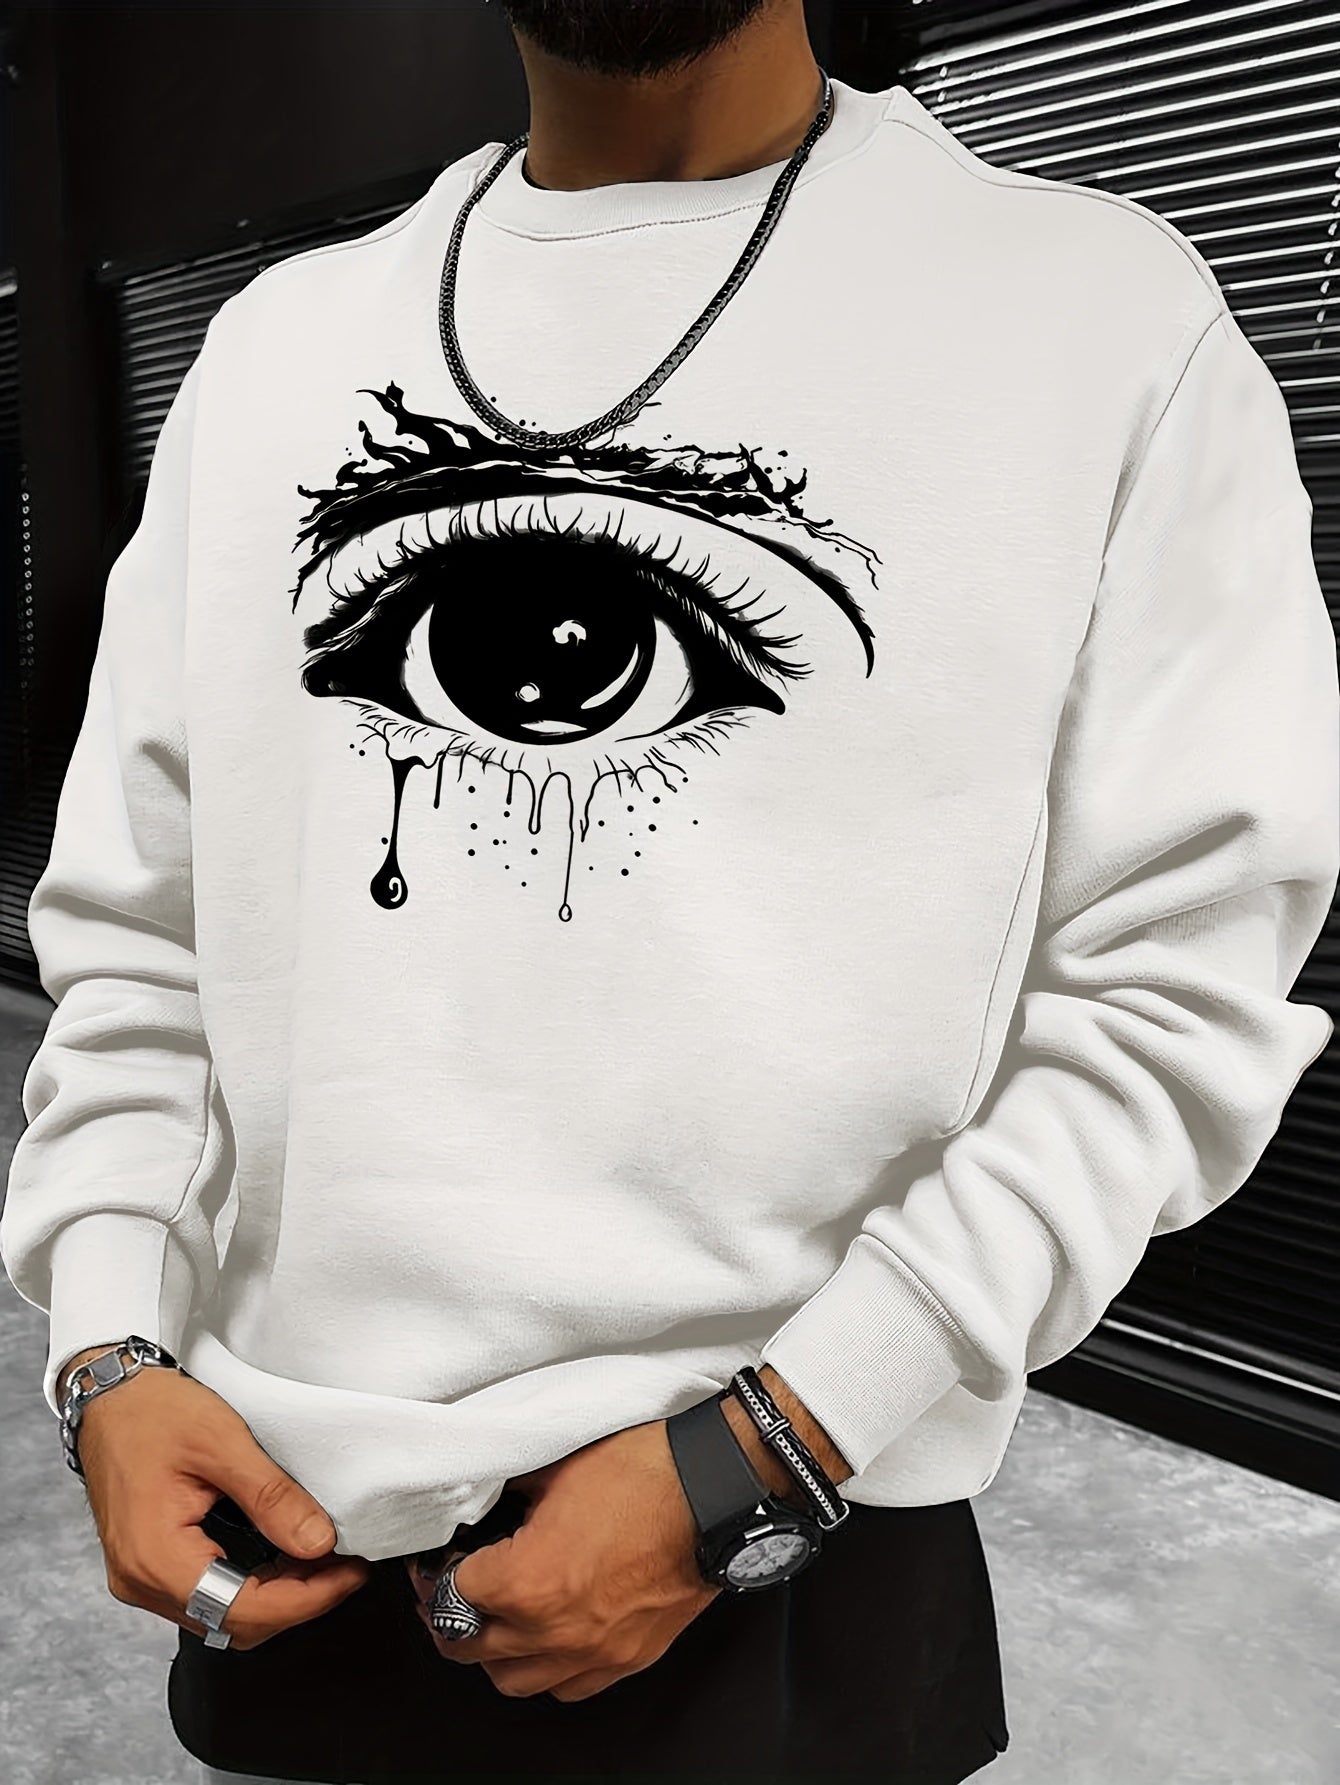 Stylish Men's Pullover with Tear Eye Design - Perfect for Outdoor Sports